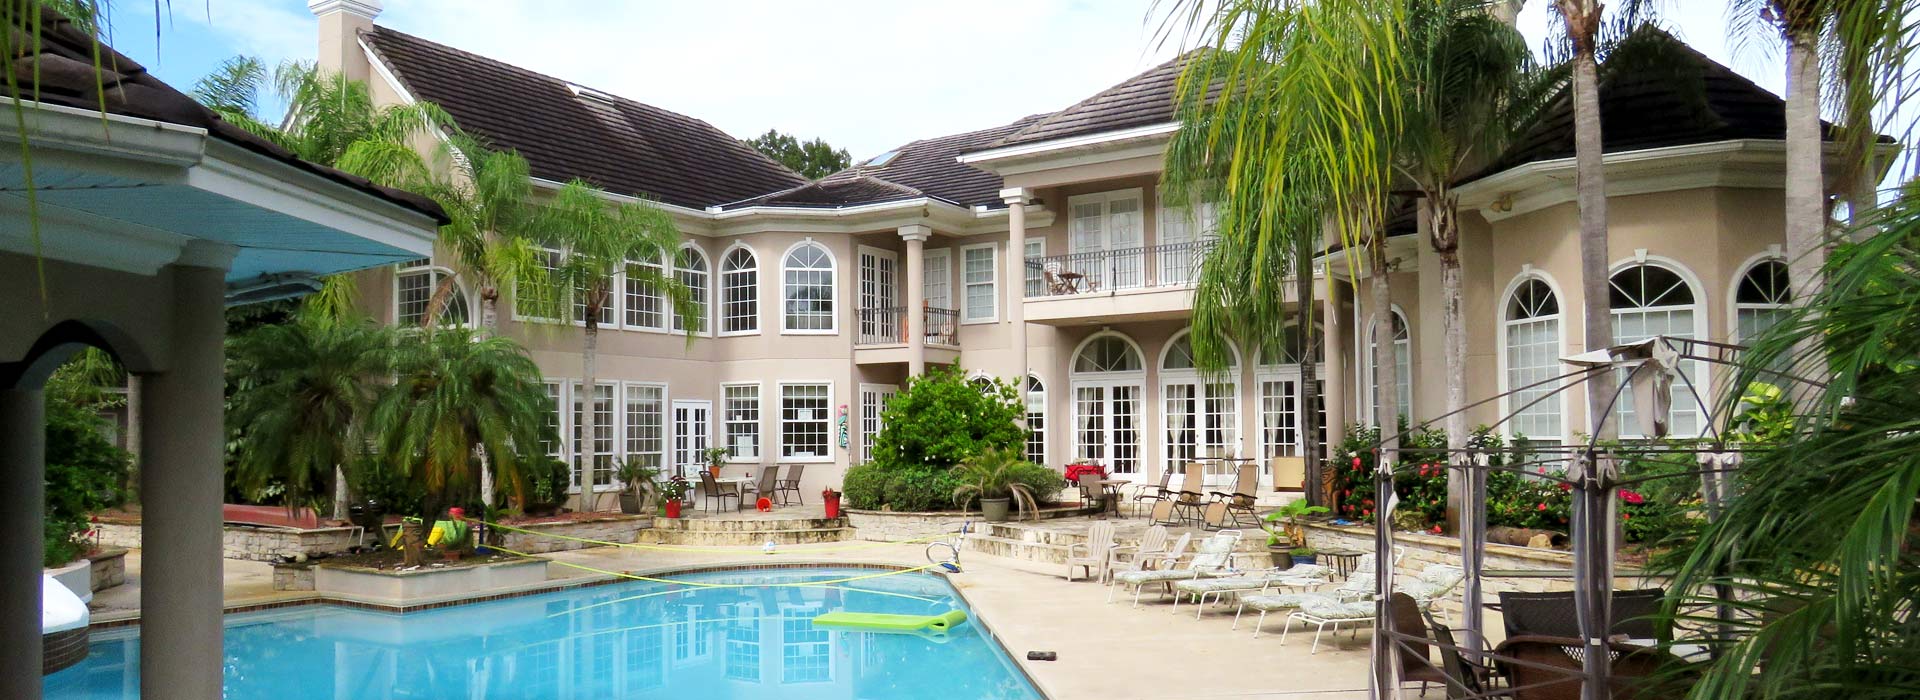 Central Florida Home Inspections Luxury House